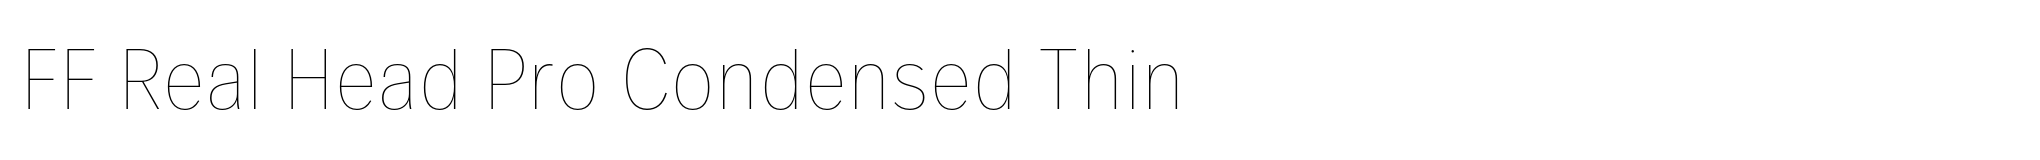 FF Real Head Pro Condensed Thin image